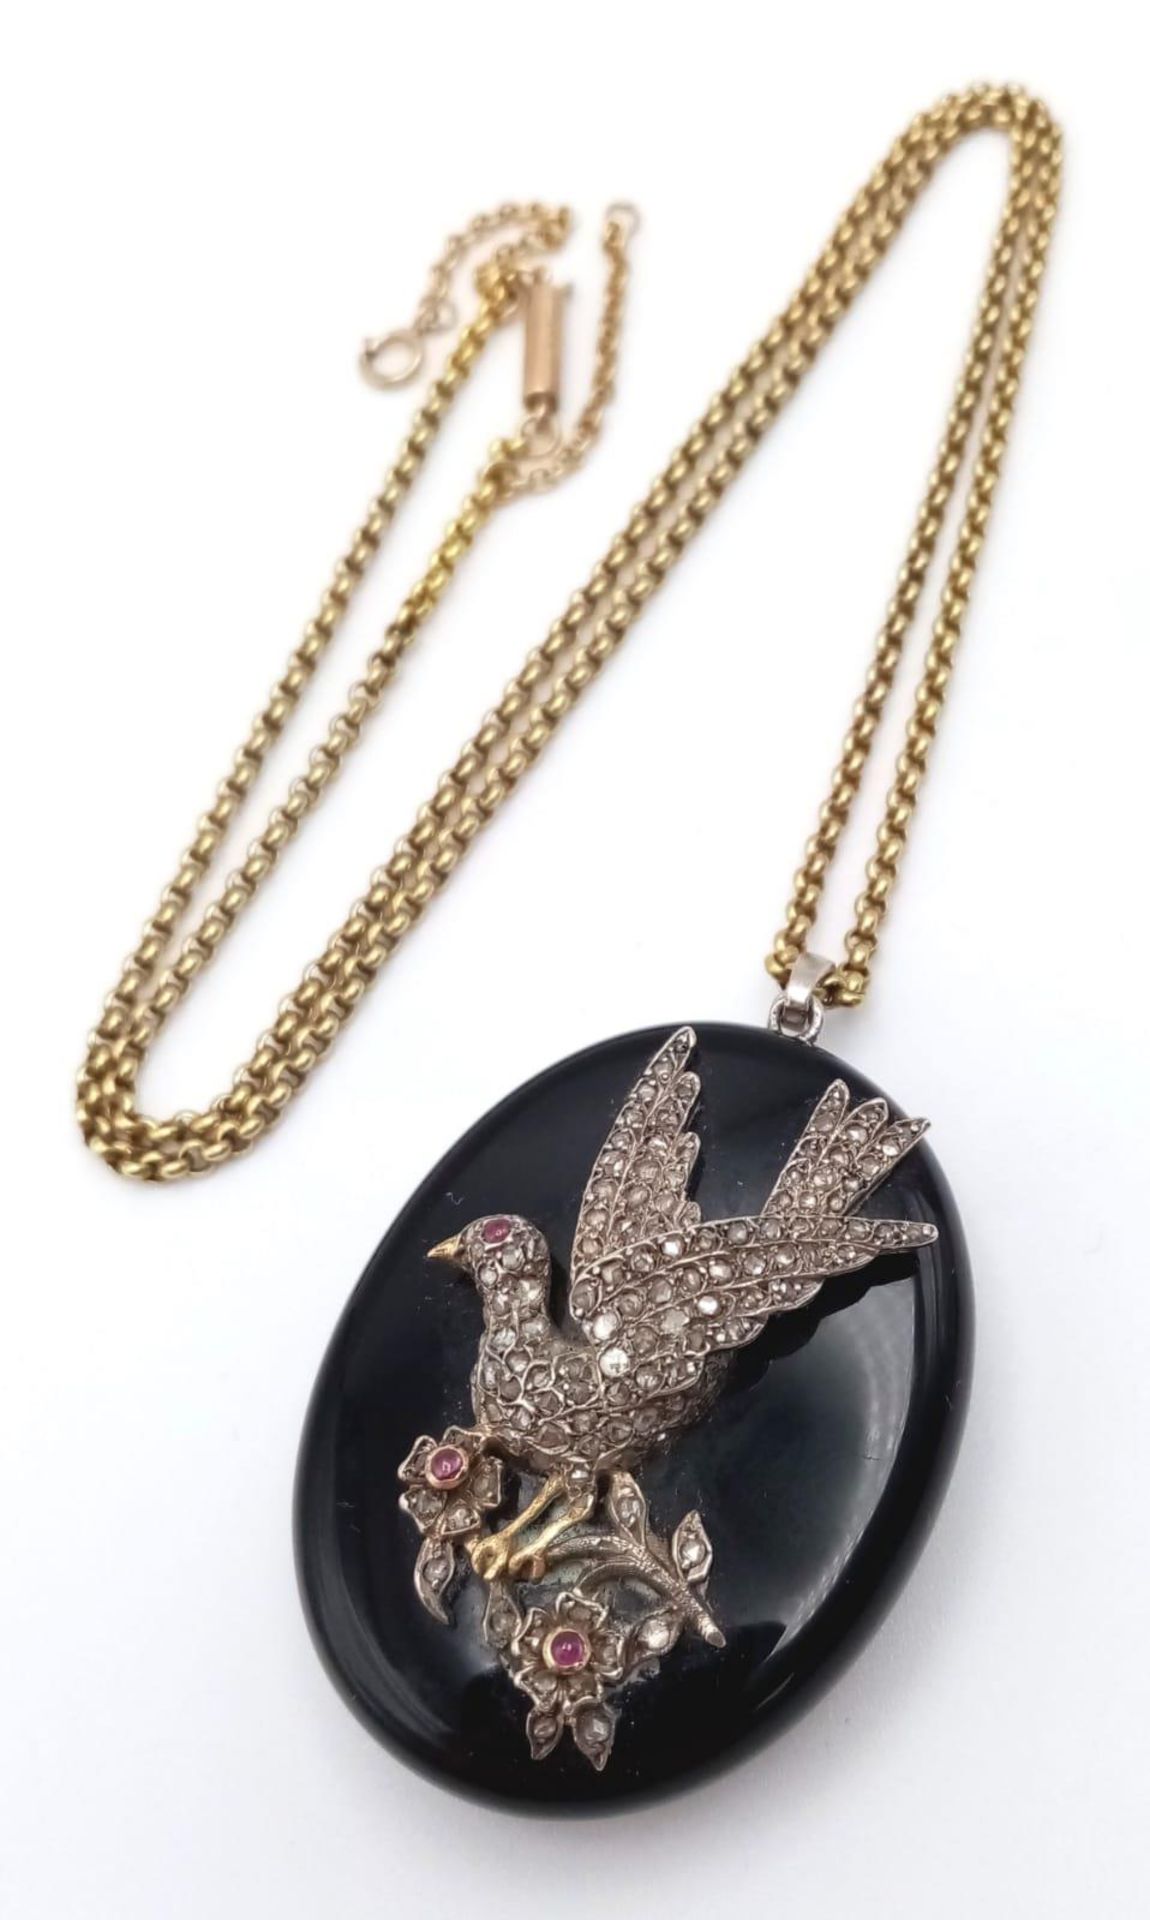 An Antique Victorian 9K Gold, Silver, Old-Cut Diamond and Ruby Decorative Dove Locket Pendant on